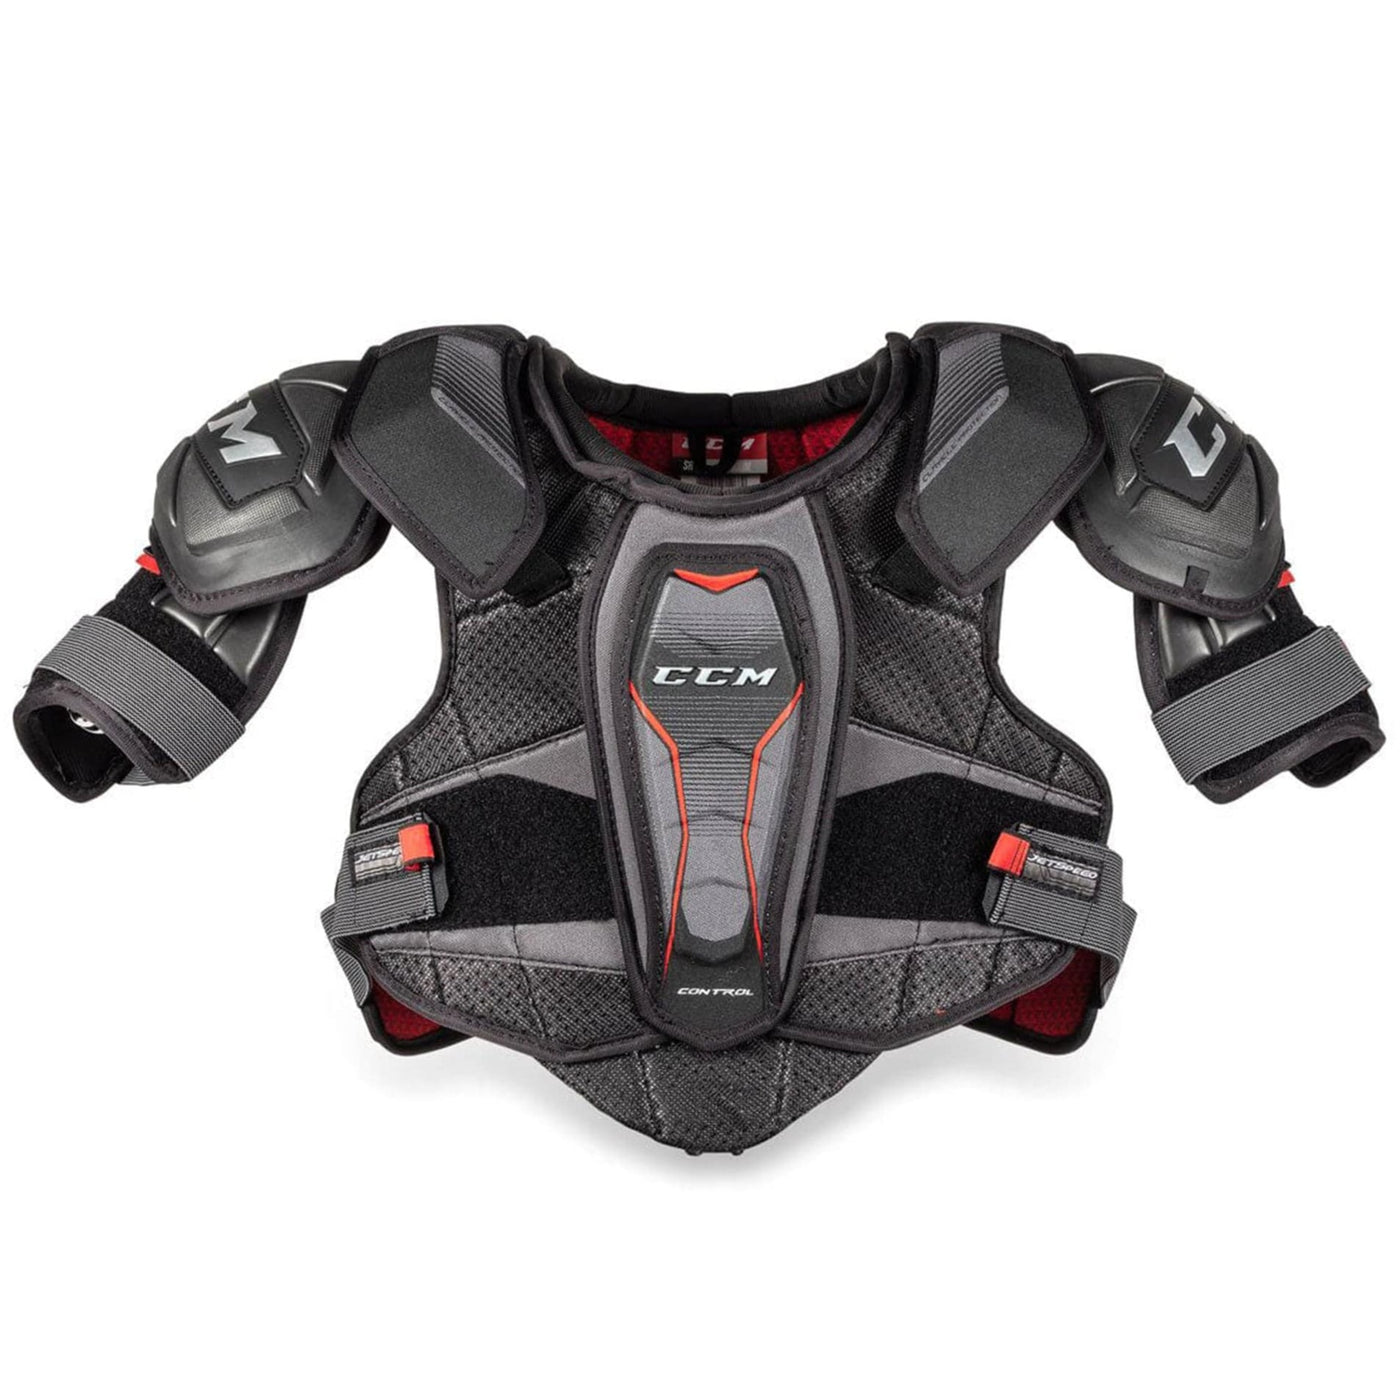 CCM Jetspeed Control Junior Hockey Shoulder Pads (2019) - The Hockey Shop Source For Sports